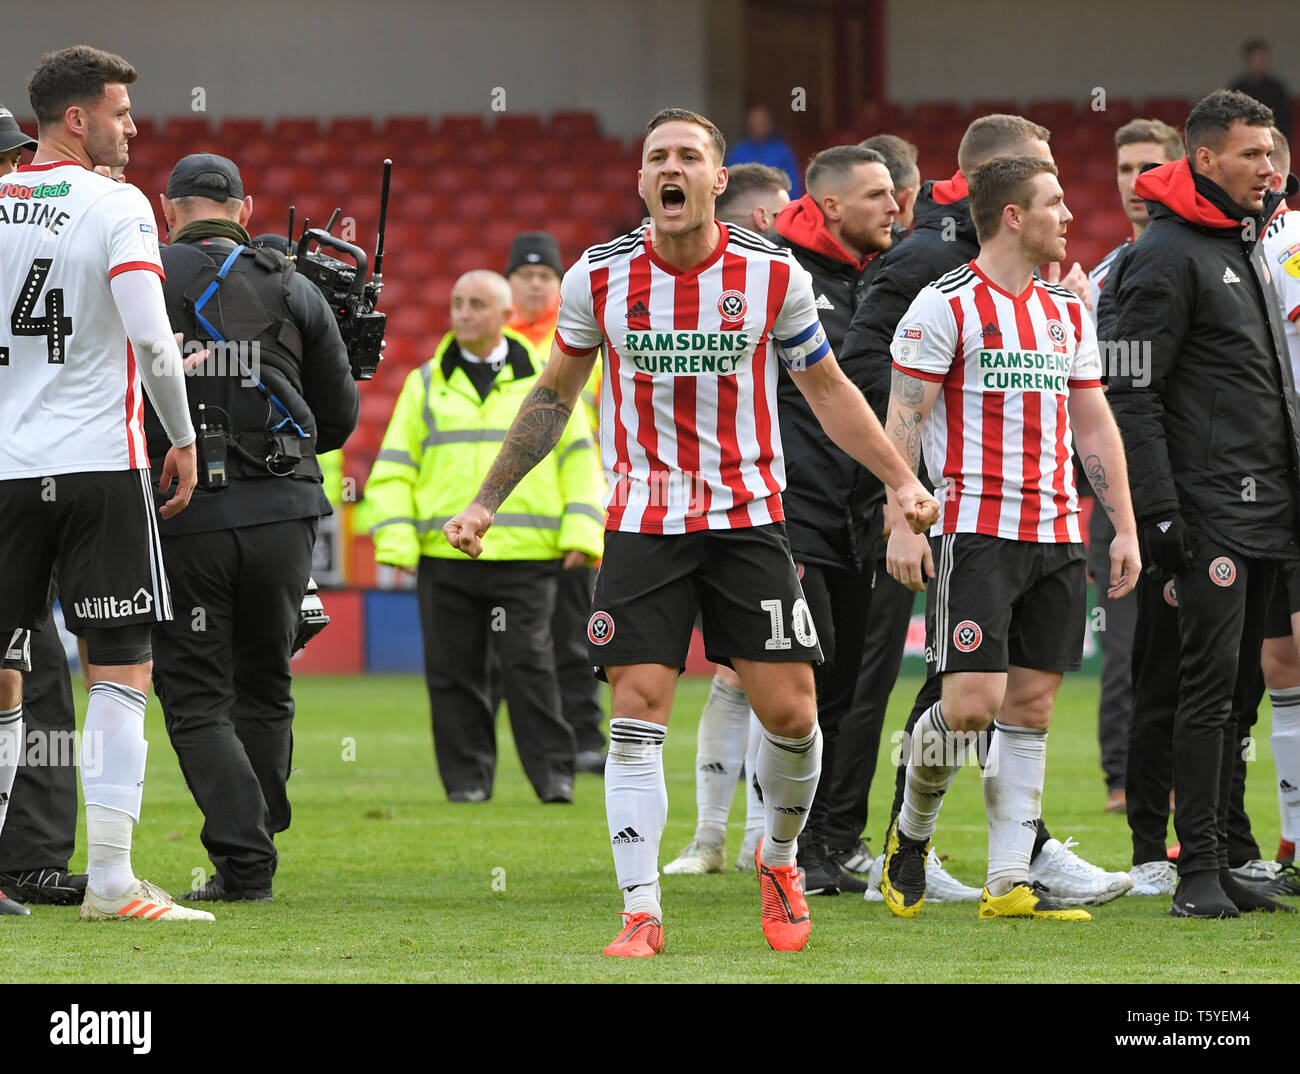 Sheffield, England 27th April. Sheffield United's Billy Sharp celebrate their win and promotion to the premiership at the end of their FA Championship football match between Sheffield United FC and Ipswich Town FC at the Sheffield United Football ground, Bramall Lane, on April 27th Sheffield, England. Stock Photo